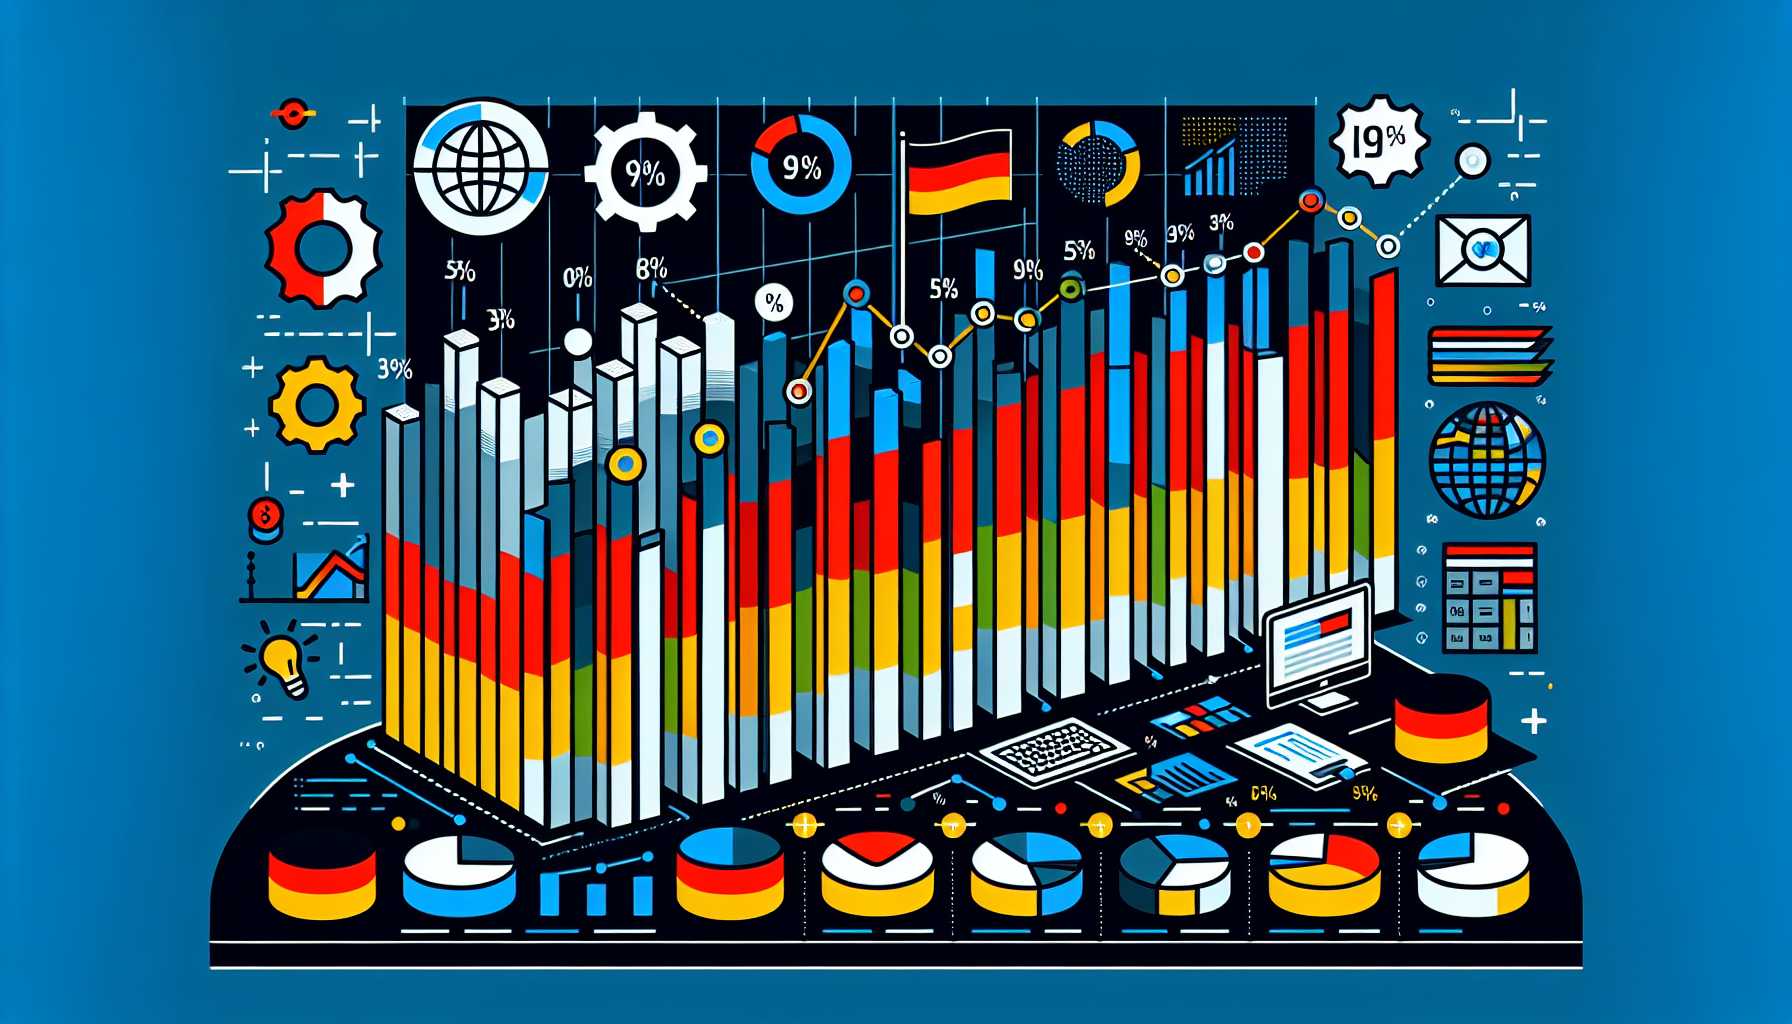 A graph showing the percentage of German businesses using big data analytics for market research.